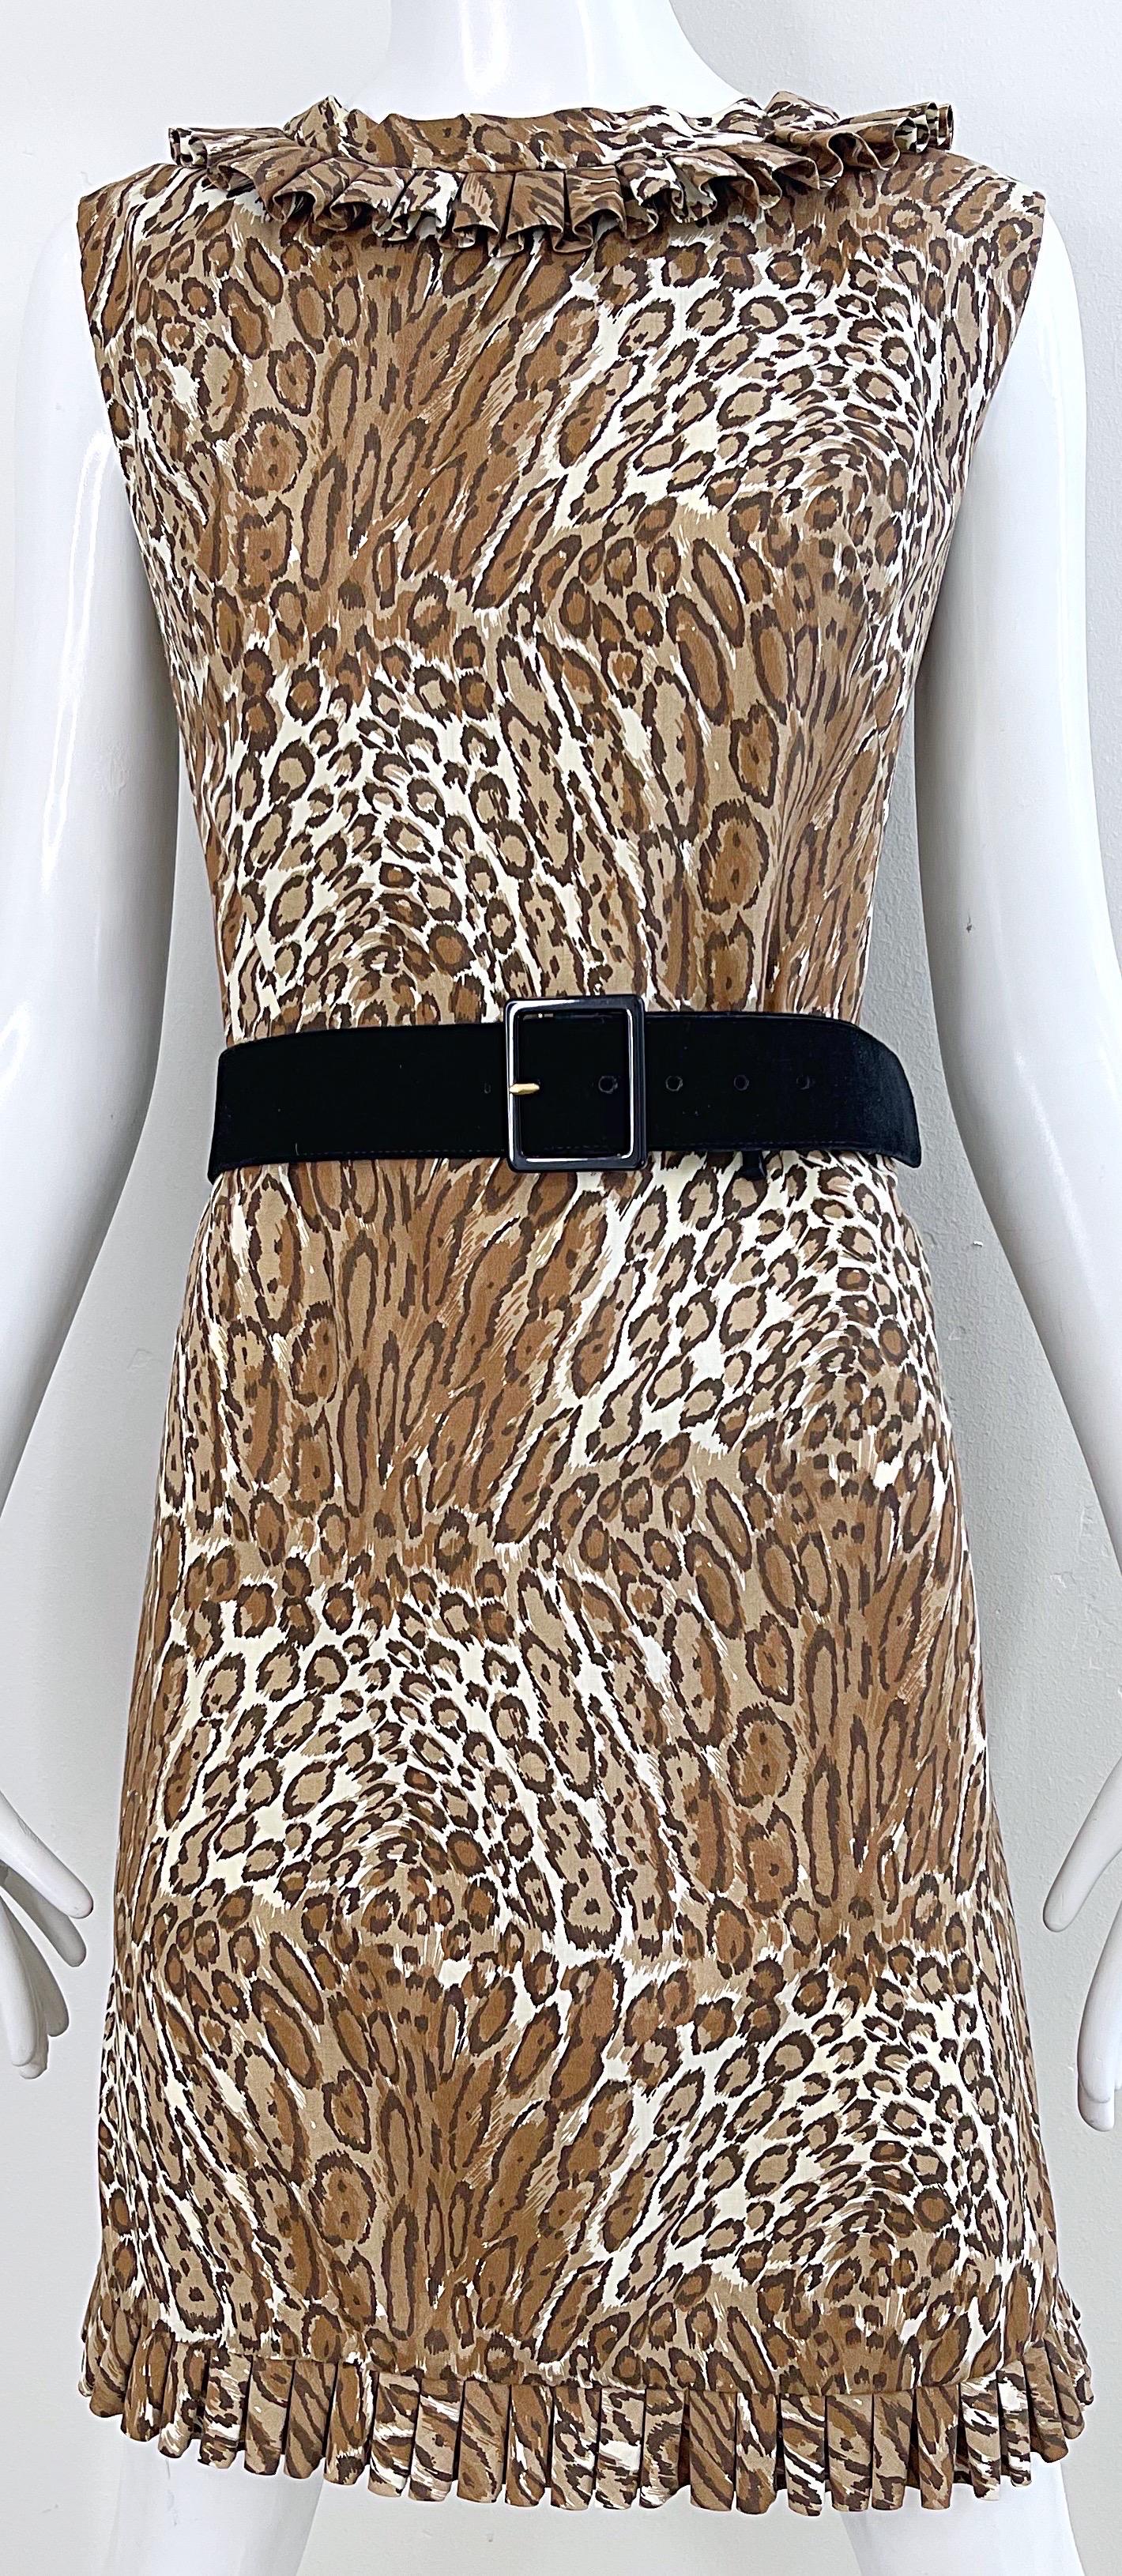 1960s Chic Leopard Cheetah Animal Abstract Print Cotton Vintage 60s Shift Dress 8